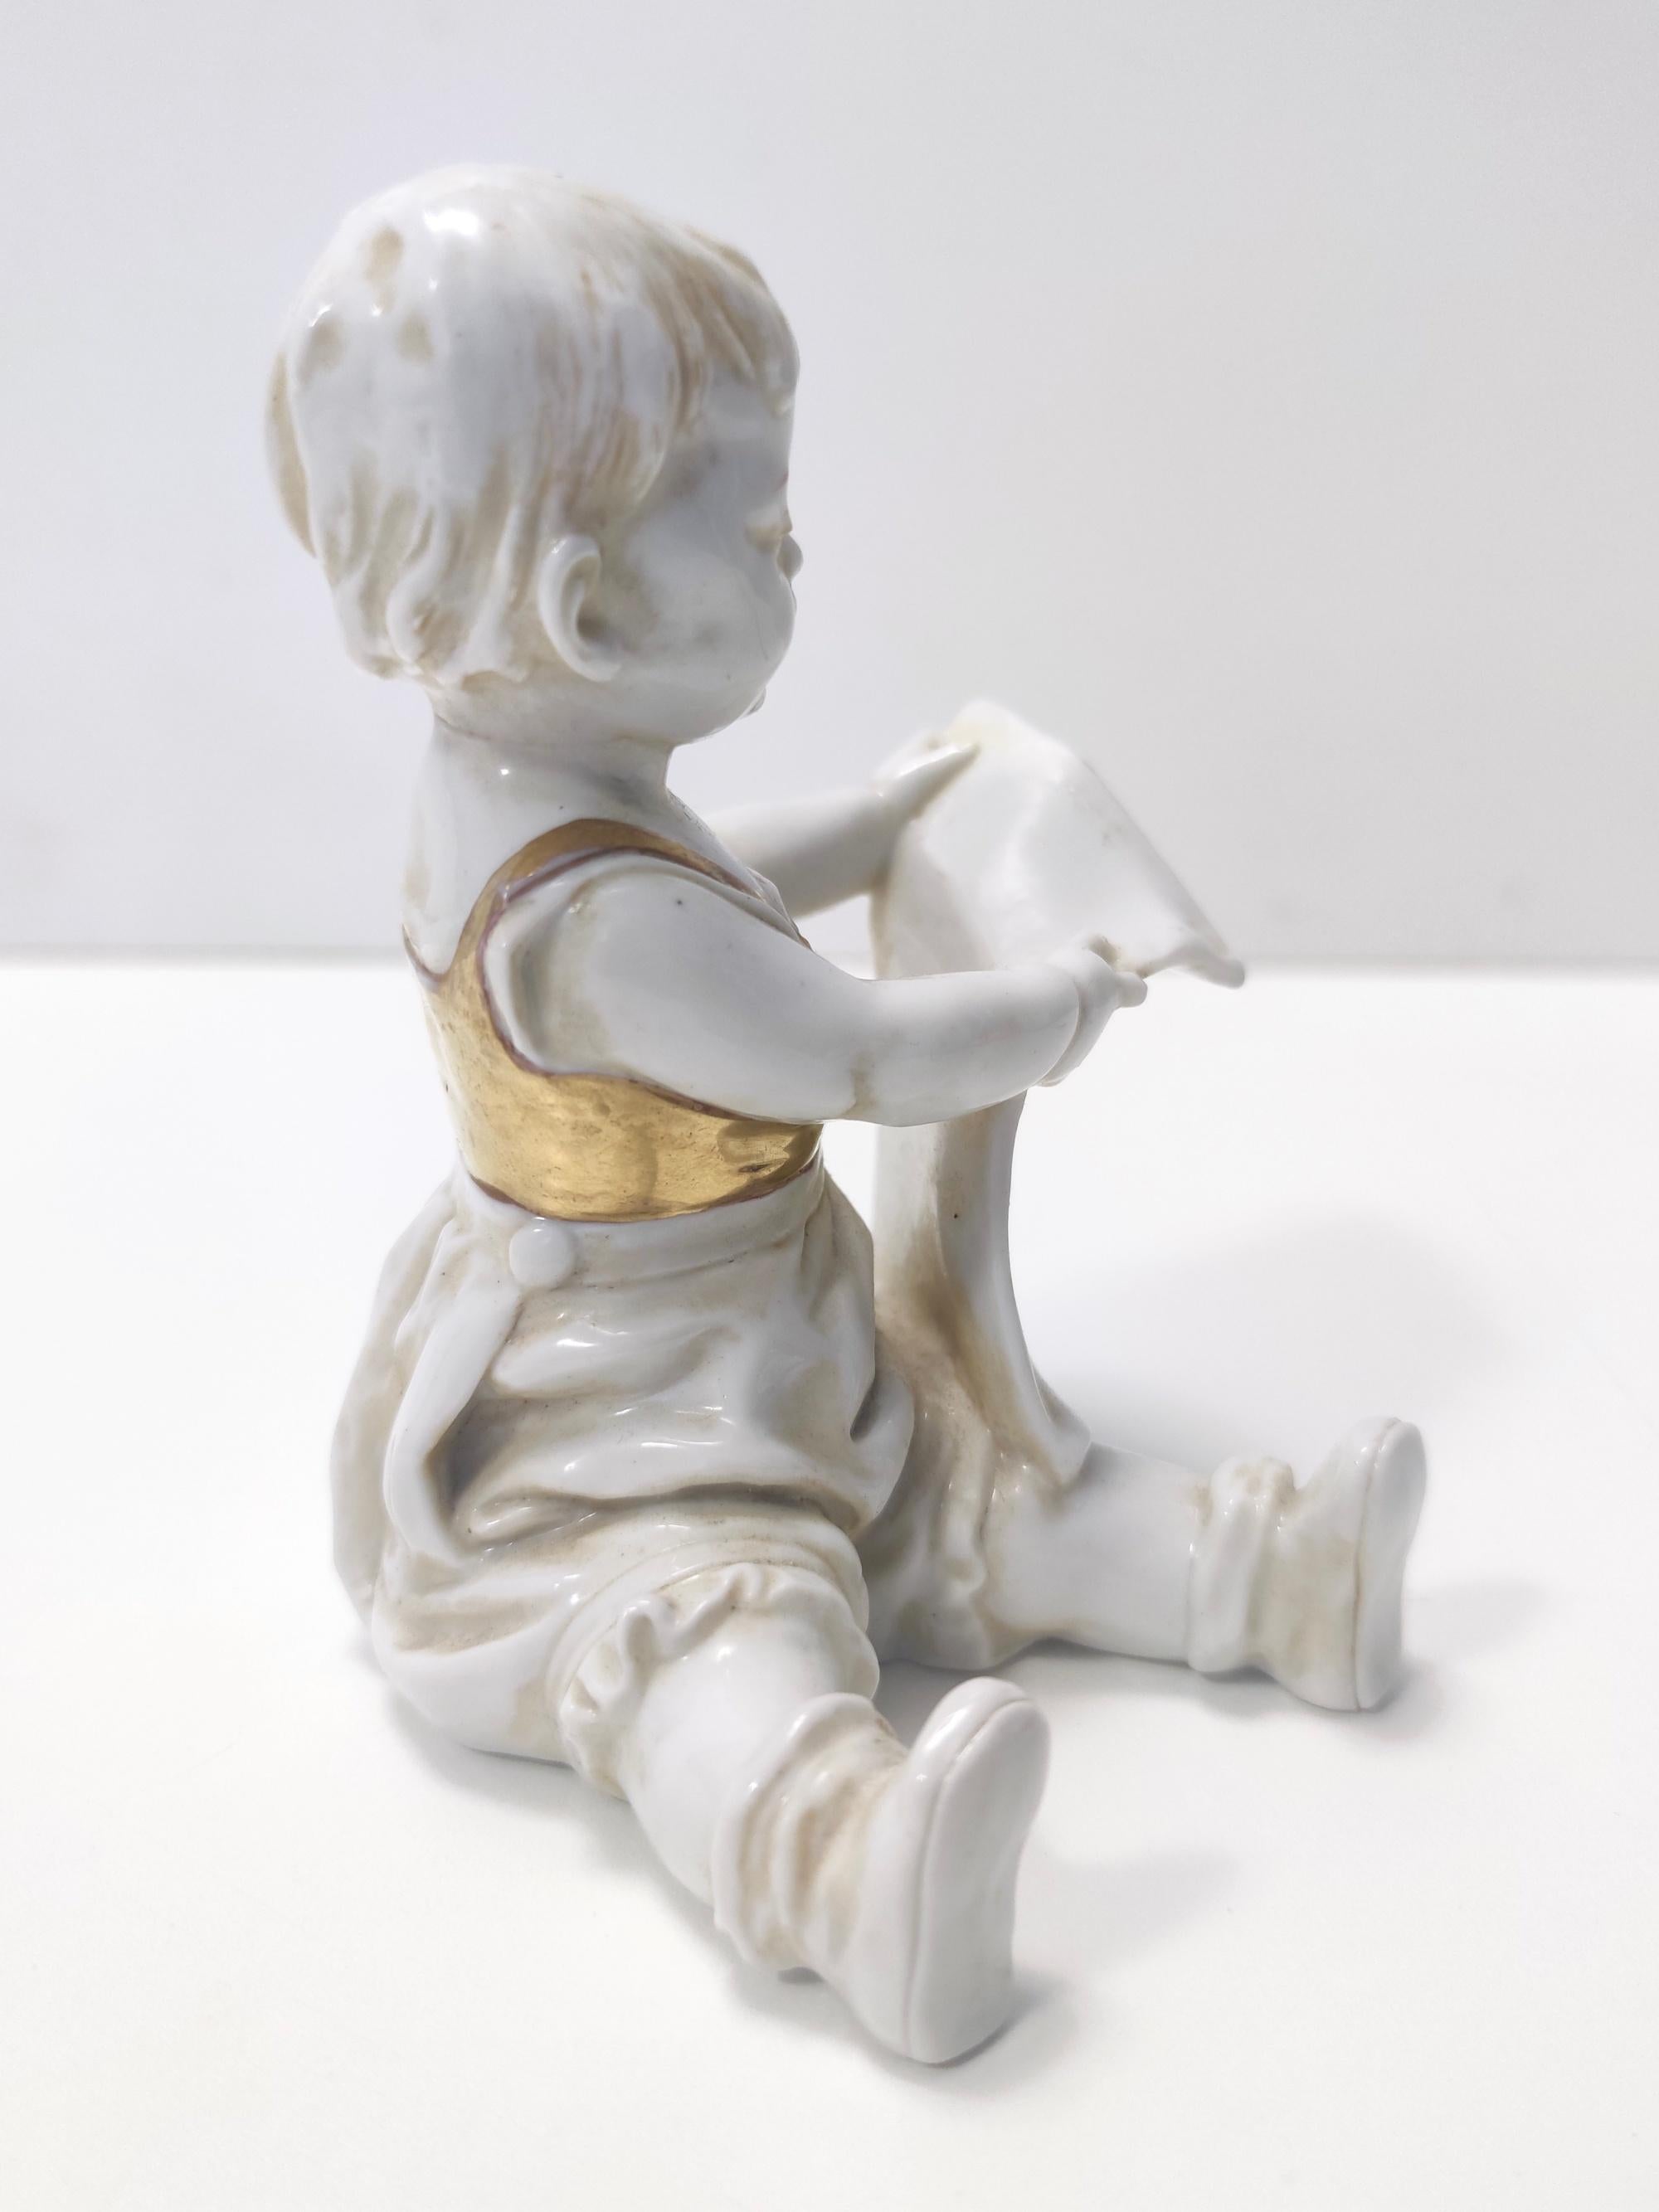 Vintage Capodimonte Ceramic and Gold Decorative Item of a Reading Child, Italy In Excellent Condition For Sale In Bresso, Lombardy